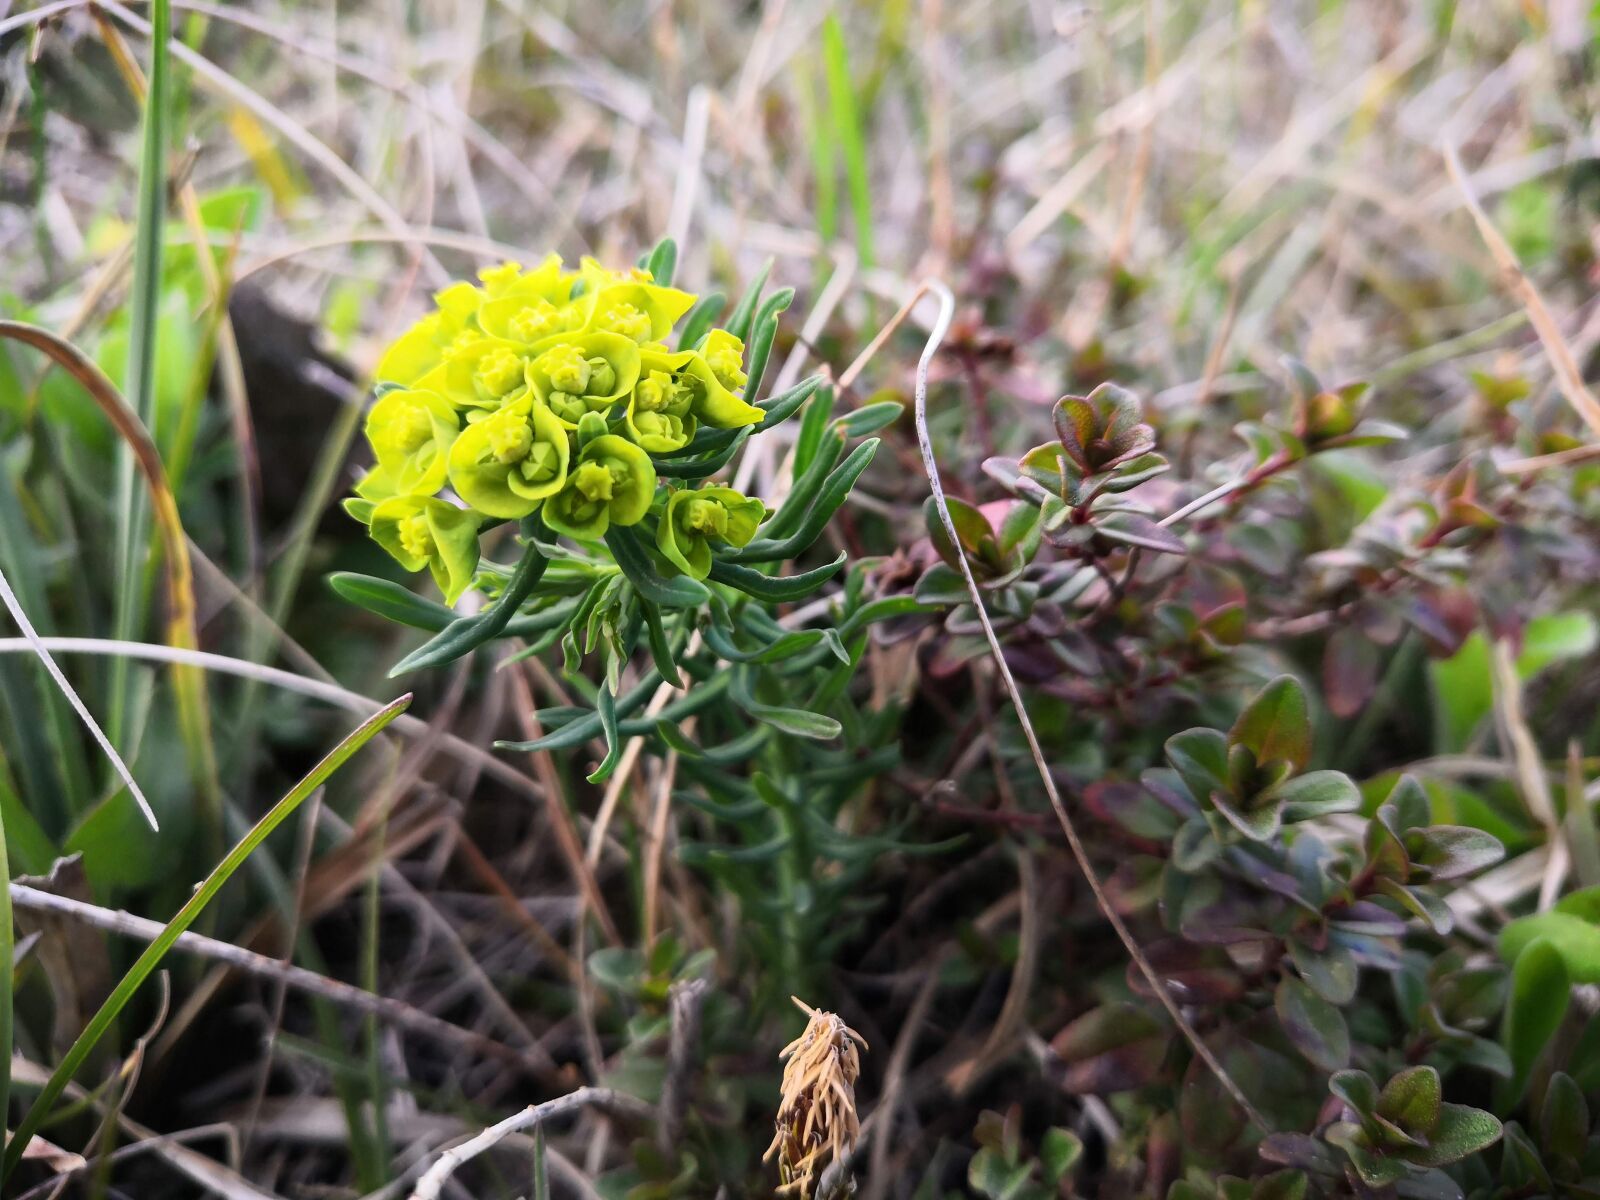 HUAWEI Honor 10 sample photo. Cypress spurge, nature, flower photography